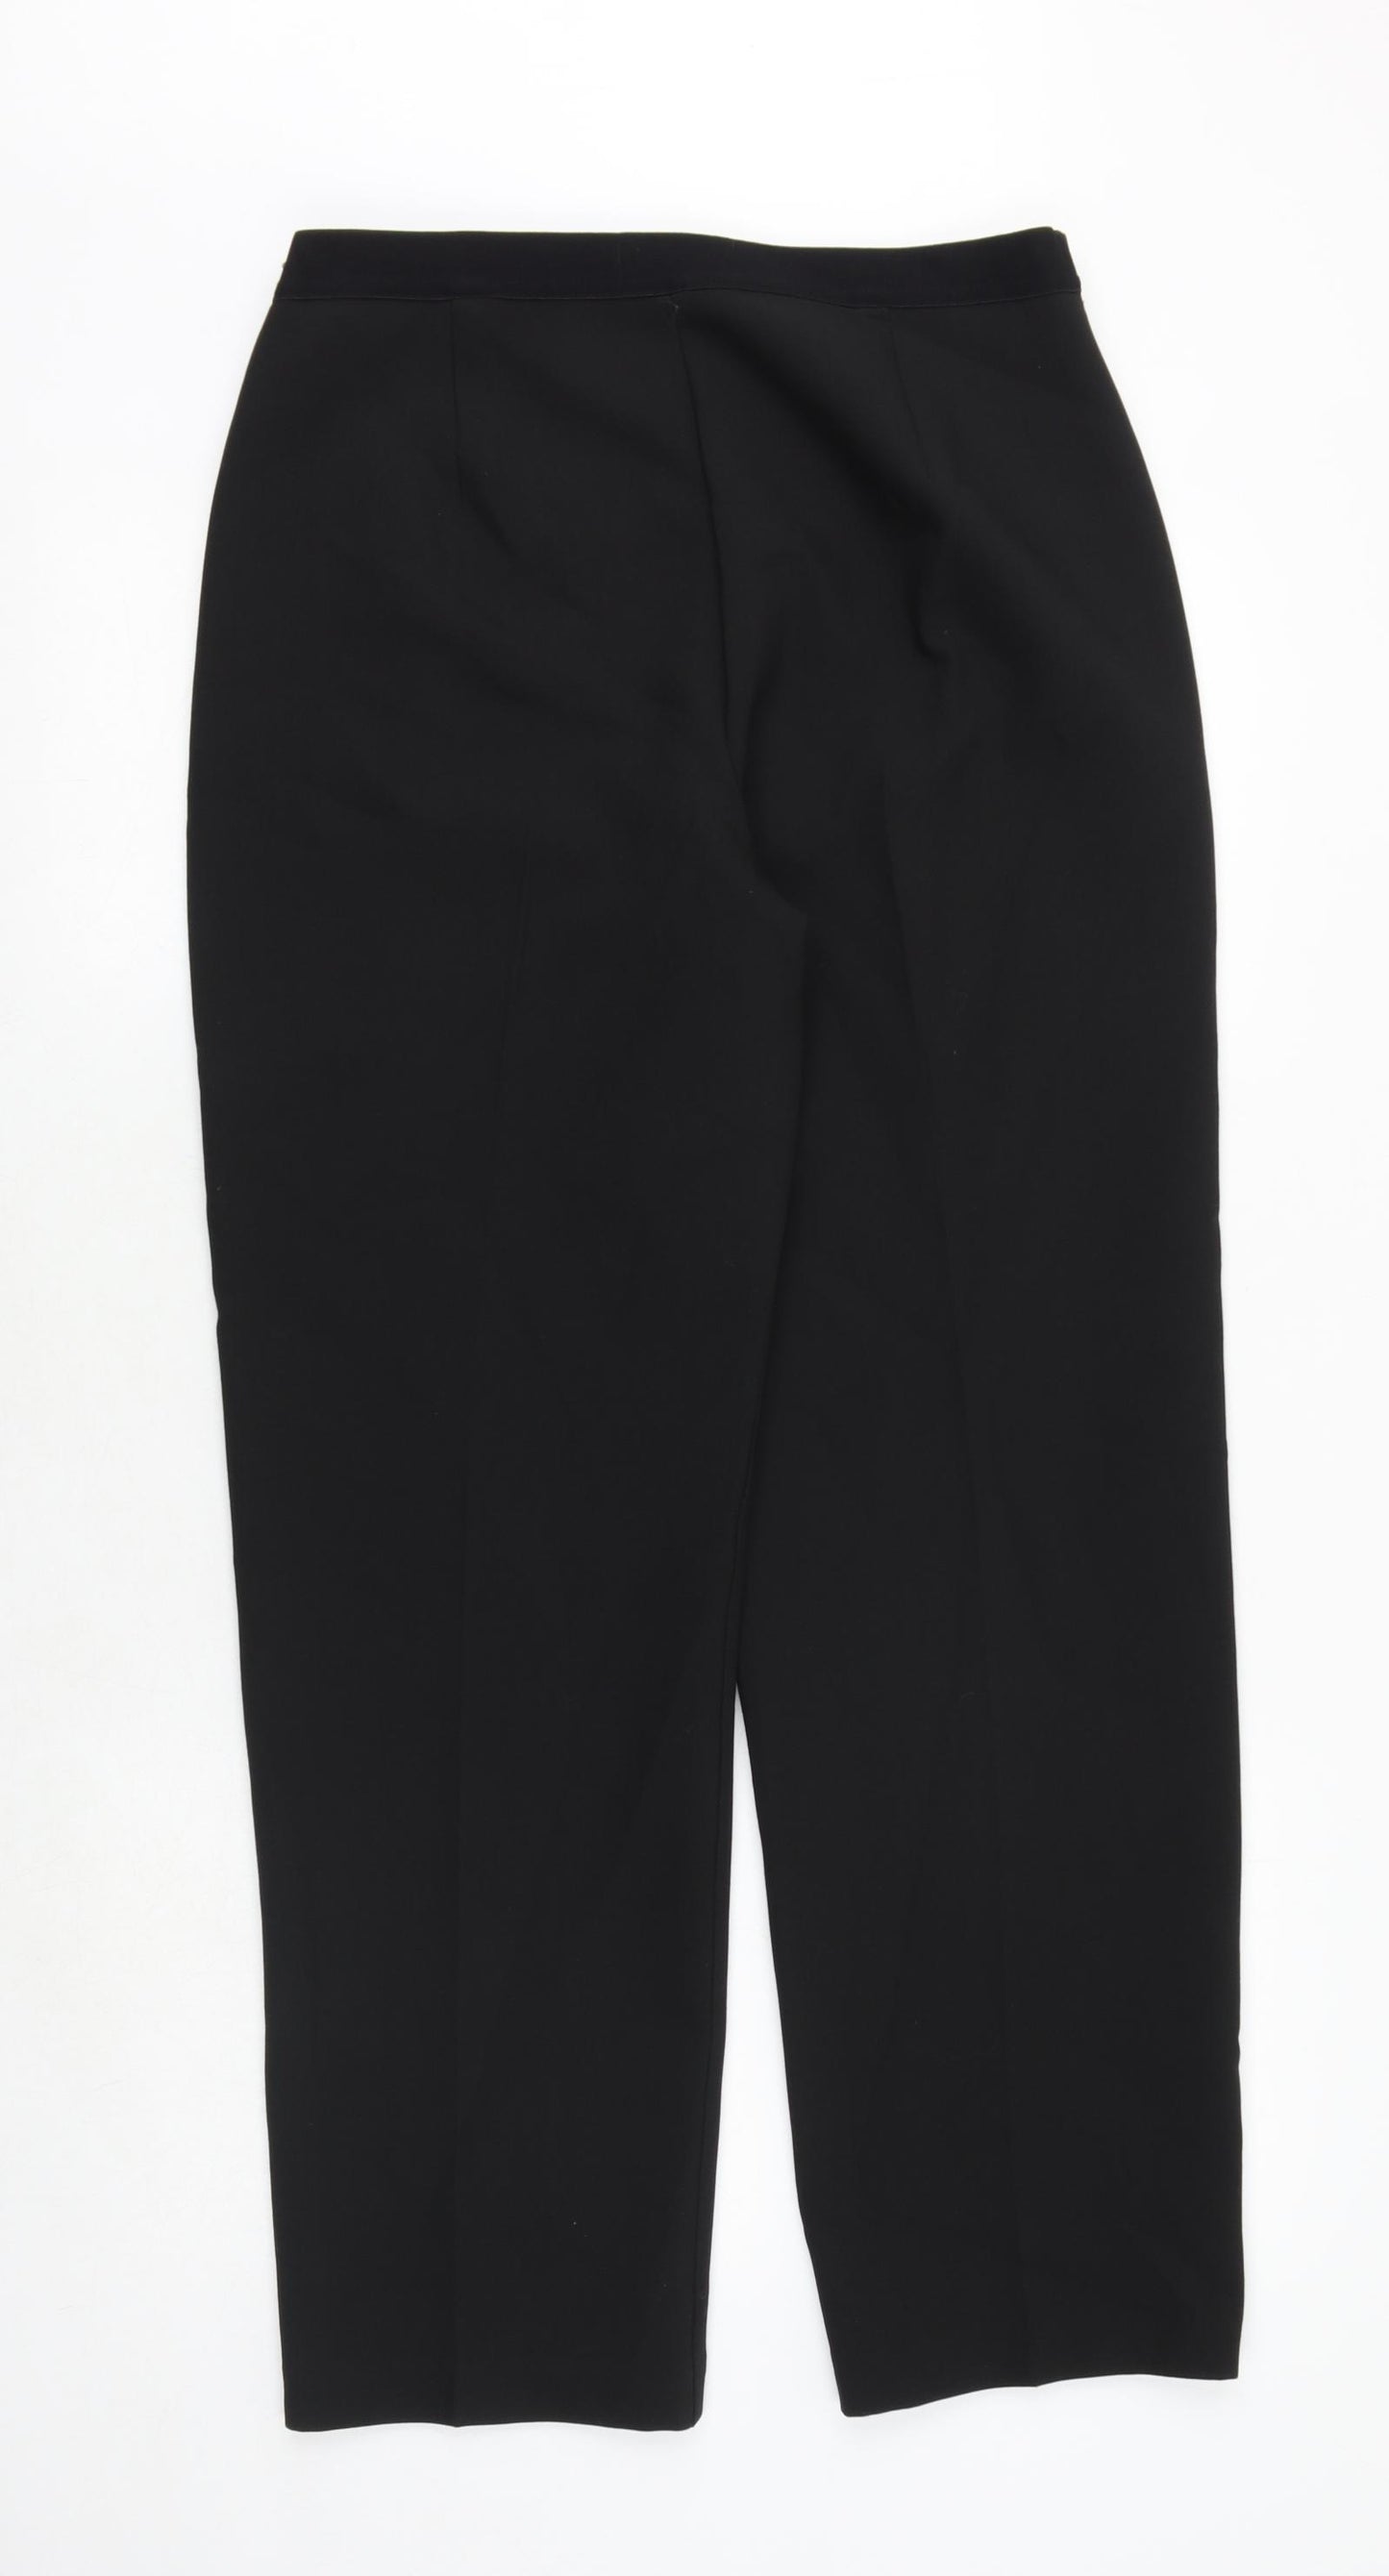 Marks and Spencer Womens Black Polyester Dress Pants Trousers Size 12 Regular Zip